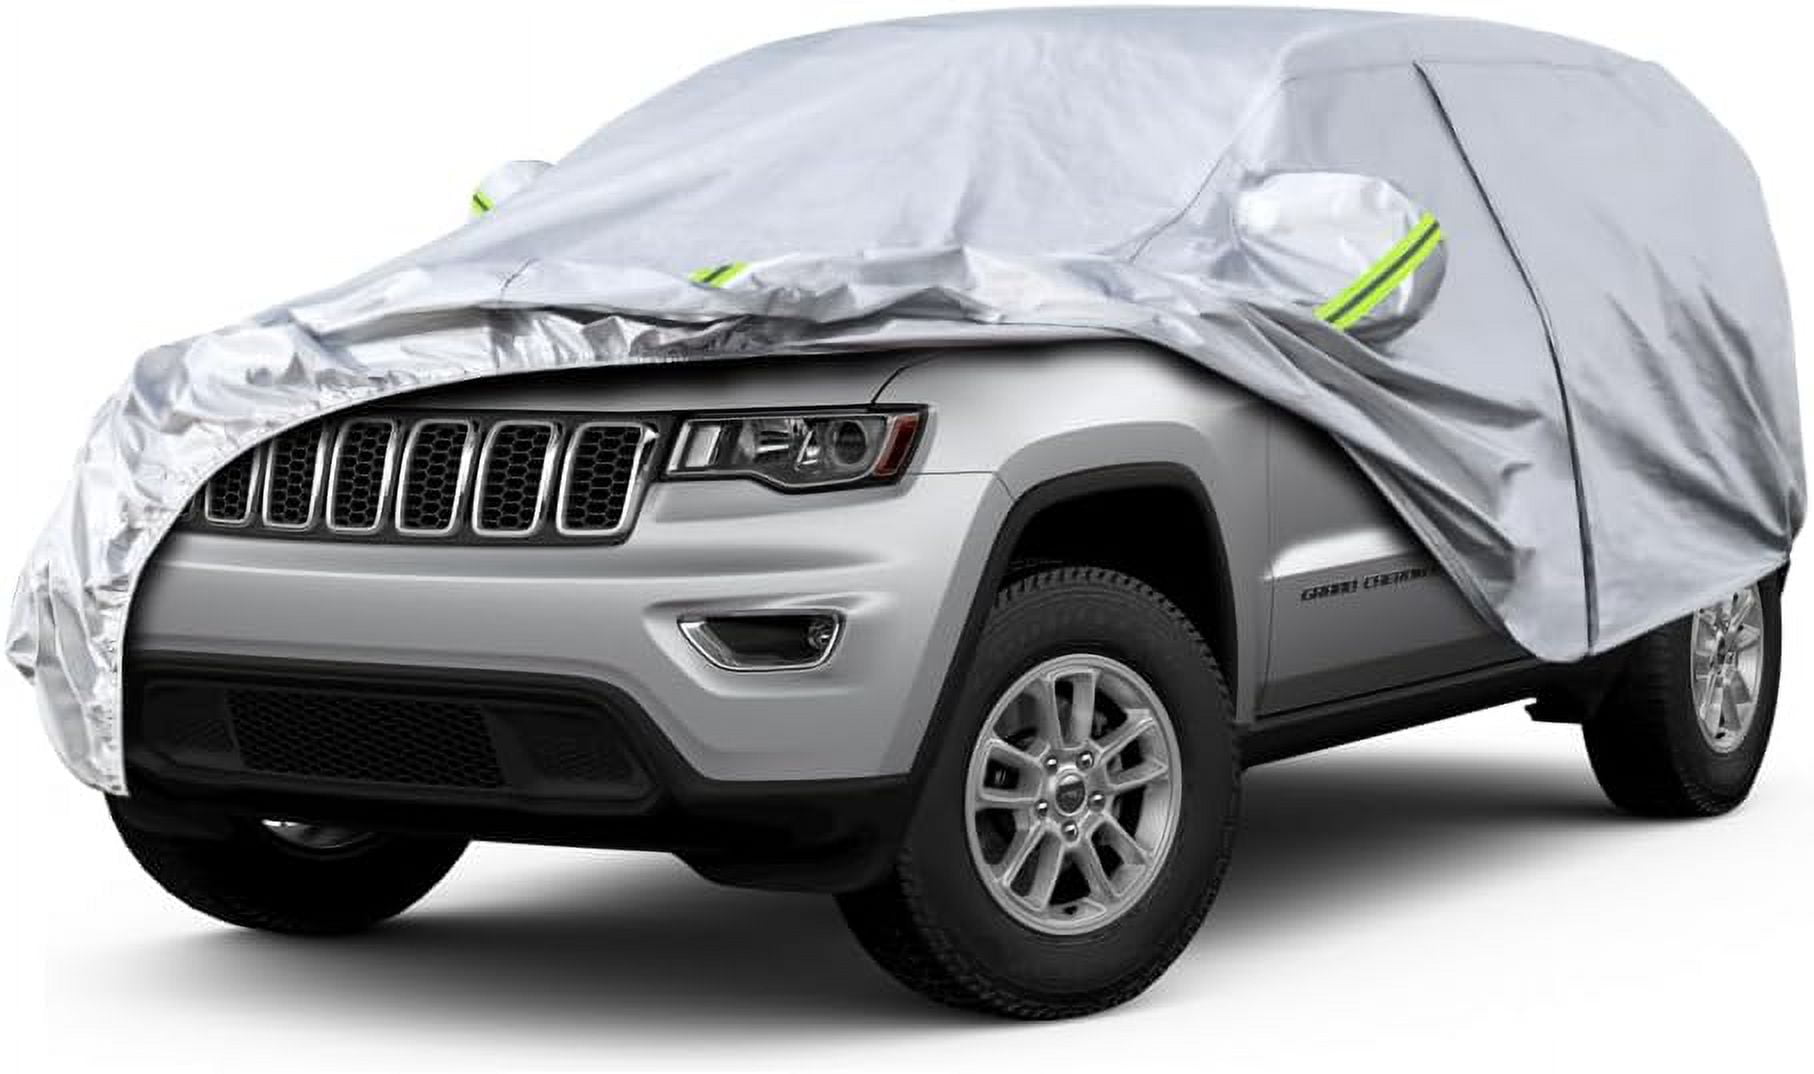 iCarCover Fits [Jeep Compass] 2017 2018 2019 2020 2021 2022 2023